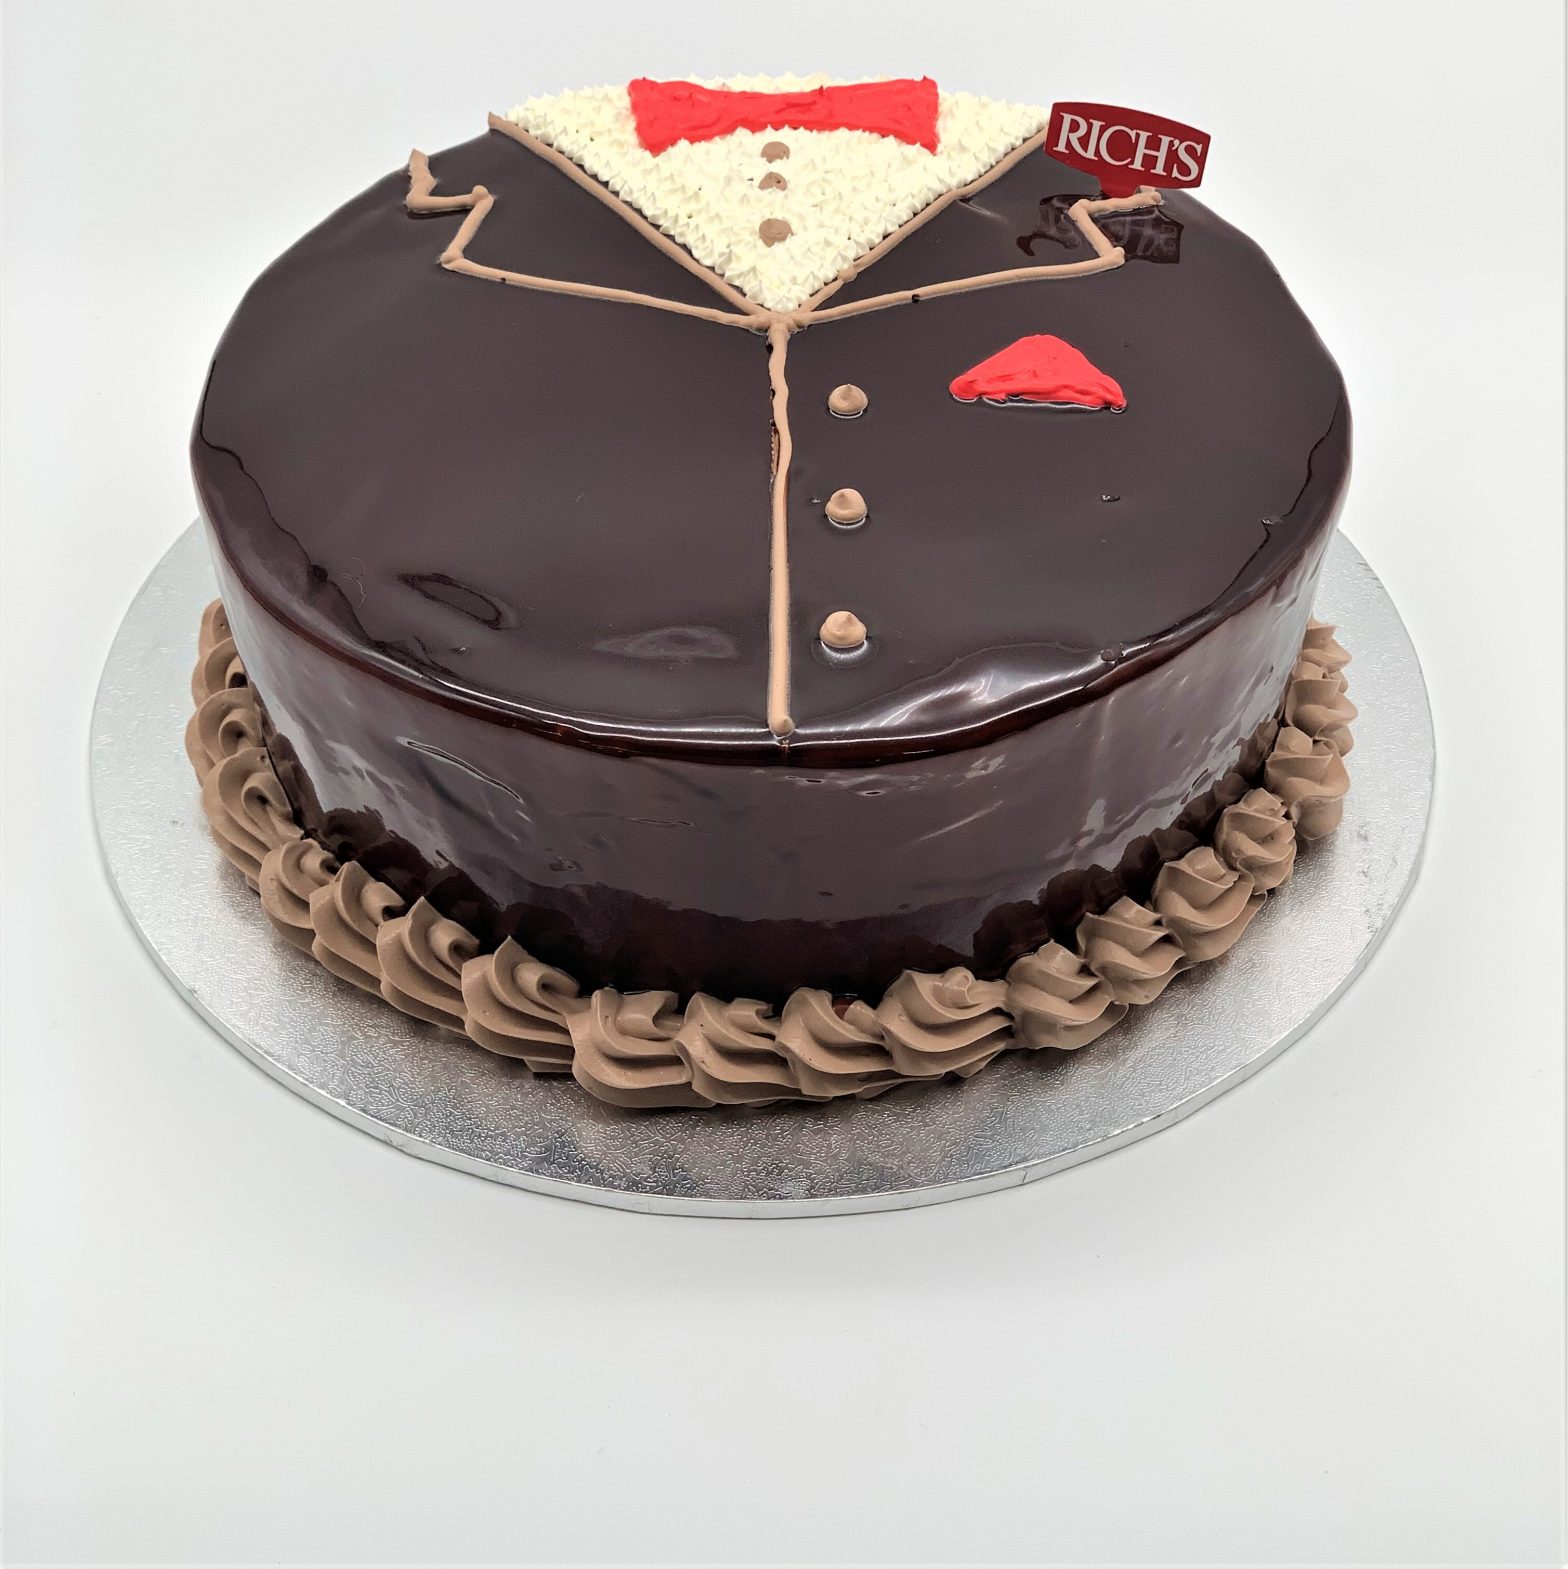 DADDY’S TUXEDO SUIT – FATHER’S DAY CAKE